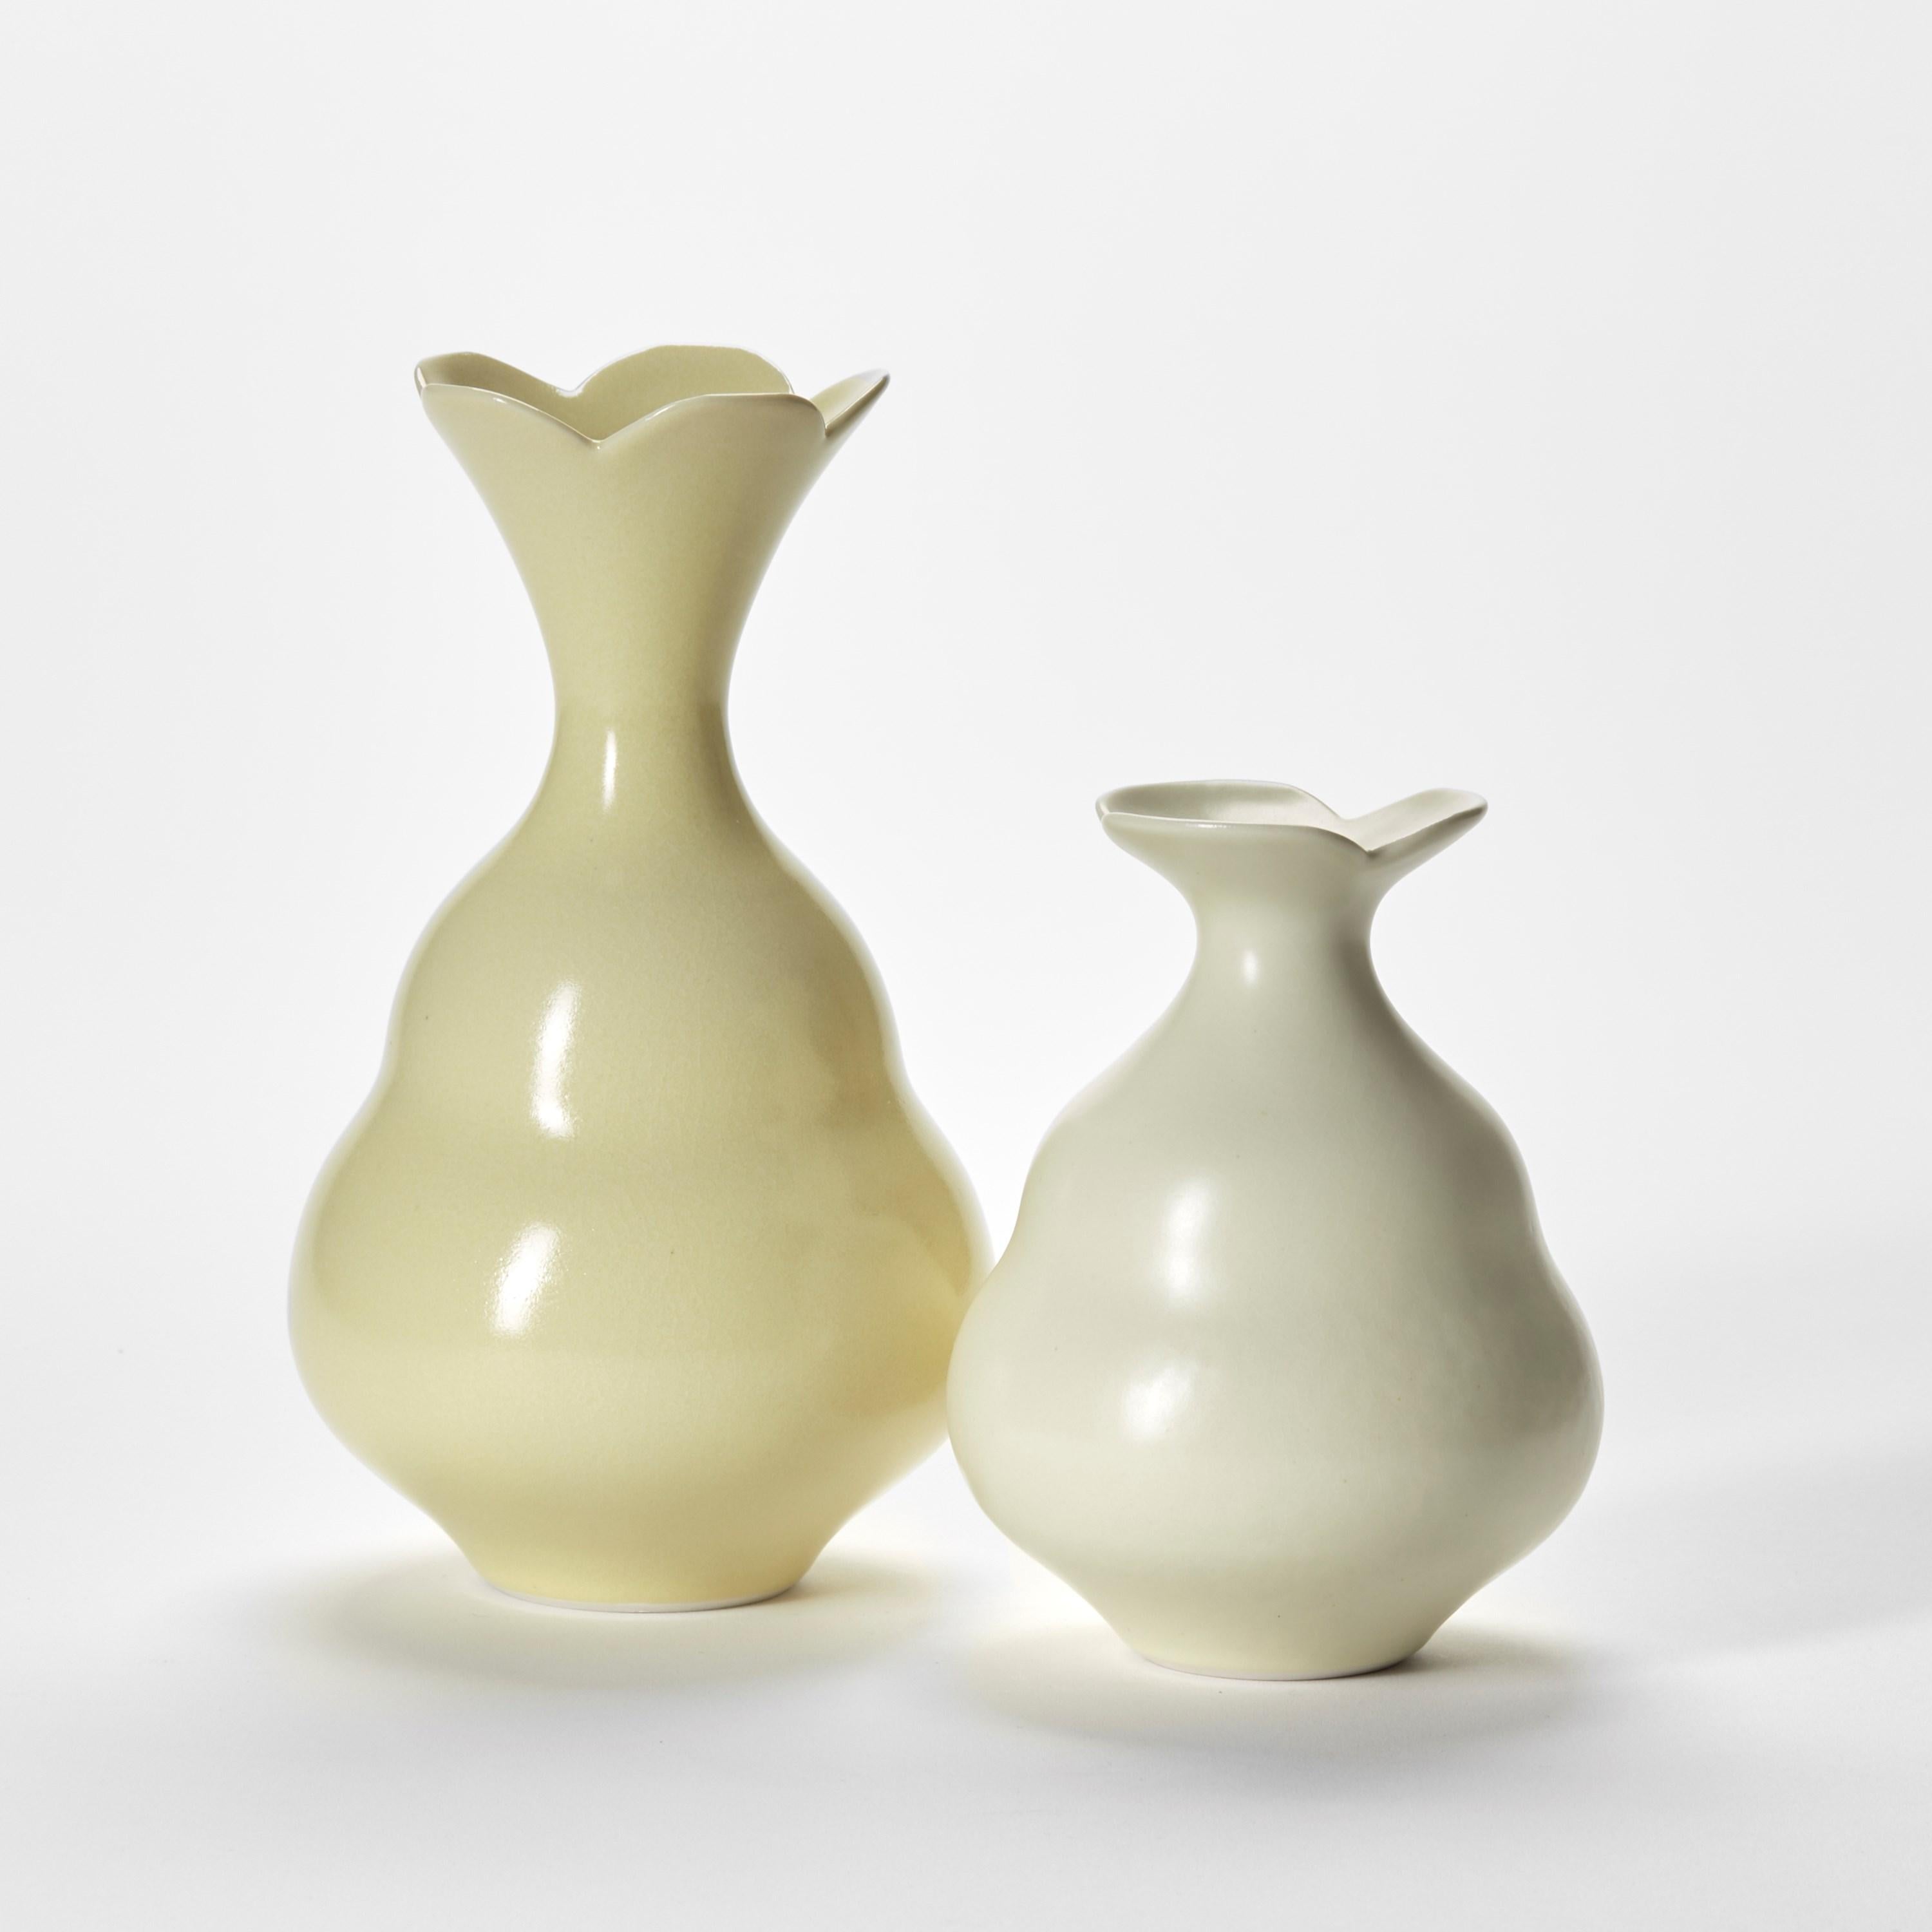 'Yellow Duo’ is a unique pair of porcelain sculptural vessels by the British artist, Vivienne Foley.

Left to right in the first image;

Strong Yellow Gourd  H 22 cm W 13 cm D 13 cm
Primrose Yellow Gourd  H 15 cm W 11.5 cm D 11.5 cm 

Vivienne Foley